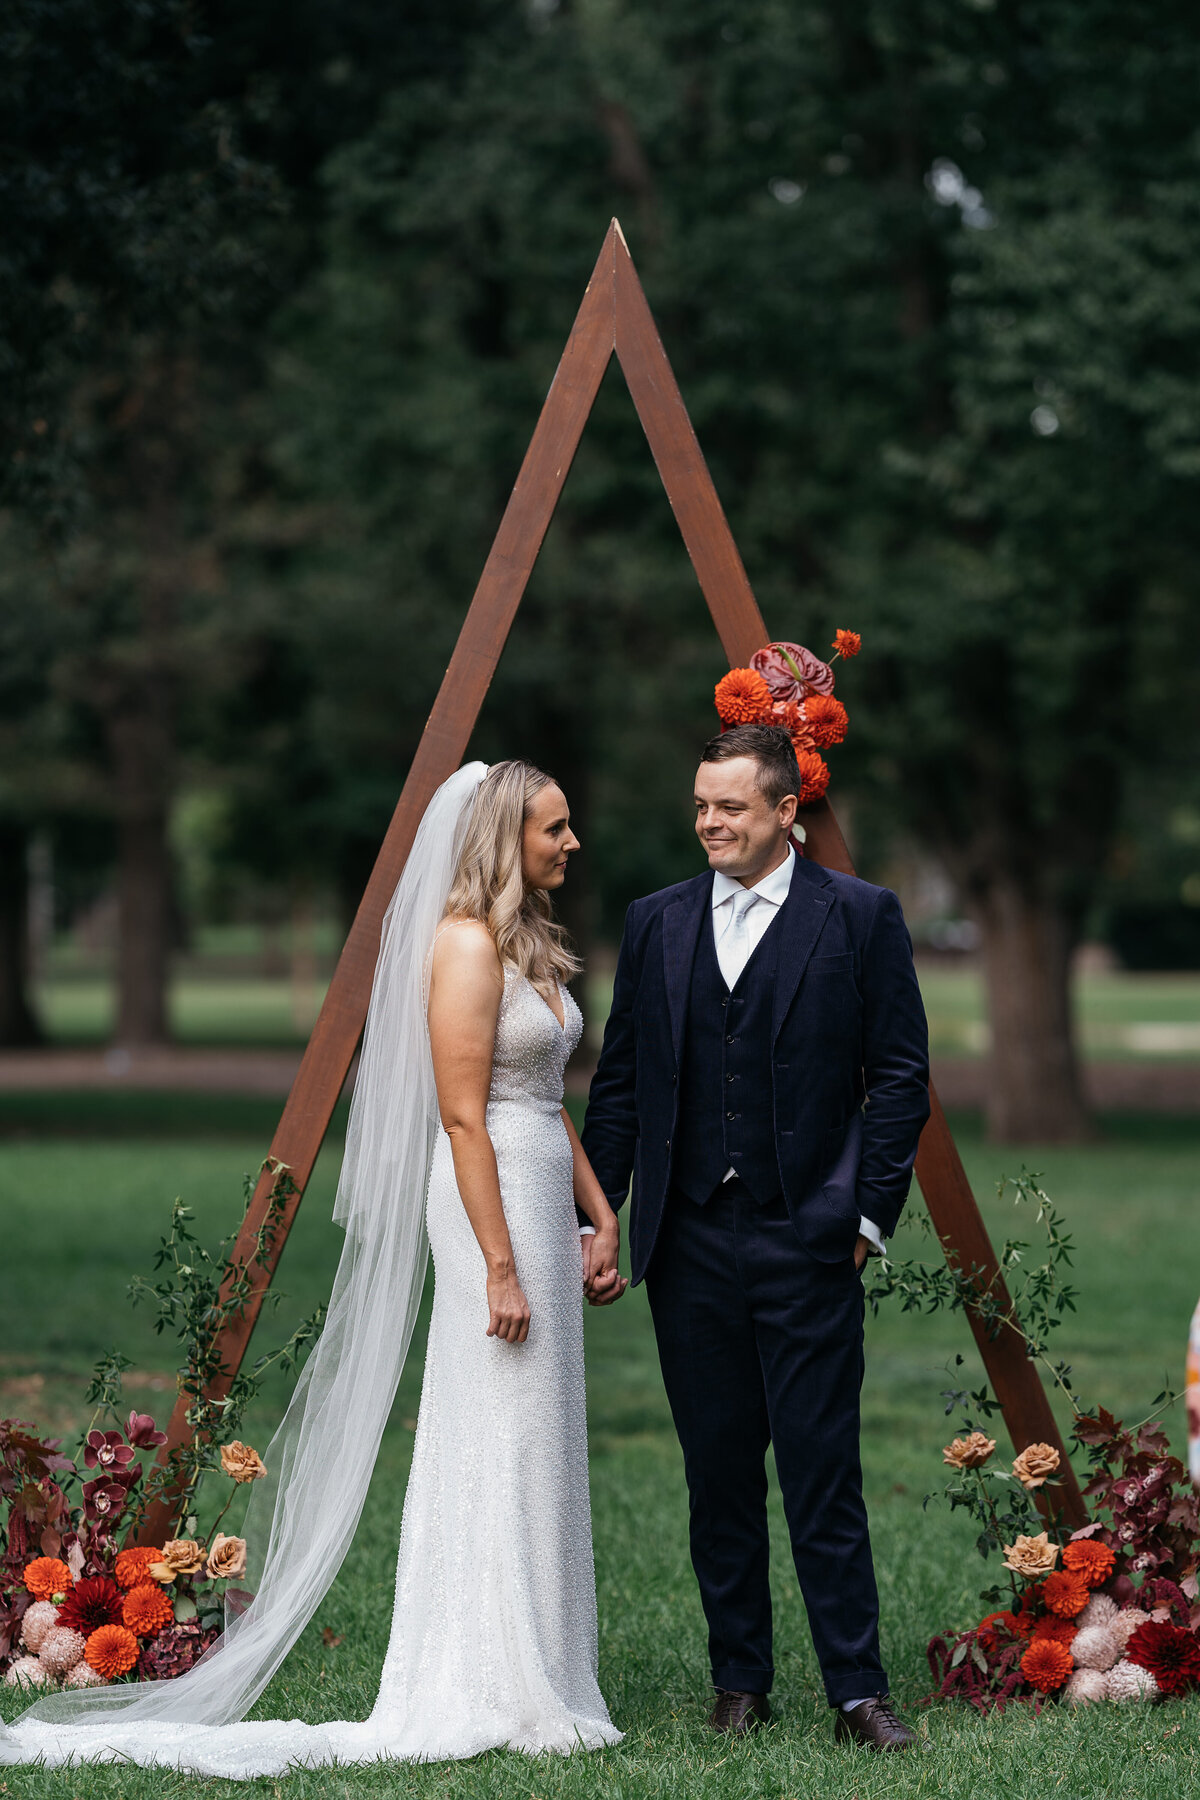 Courtney Laura Photography, Melbourne Wedding Photographer, Fitzroy Nth, 75 Reid St, Cath and Mitch-370